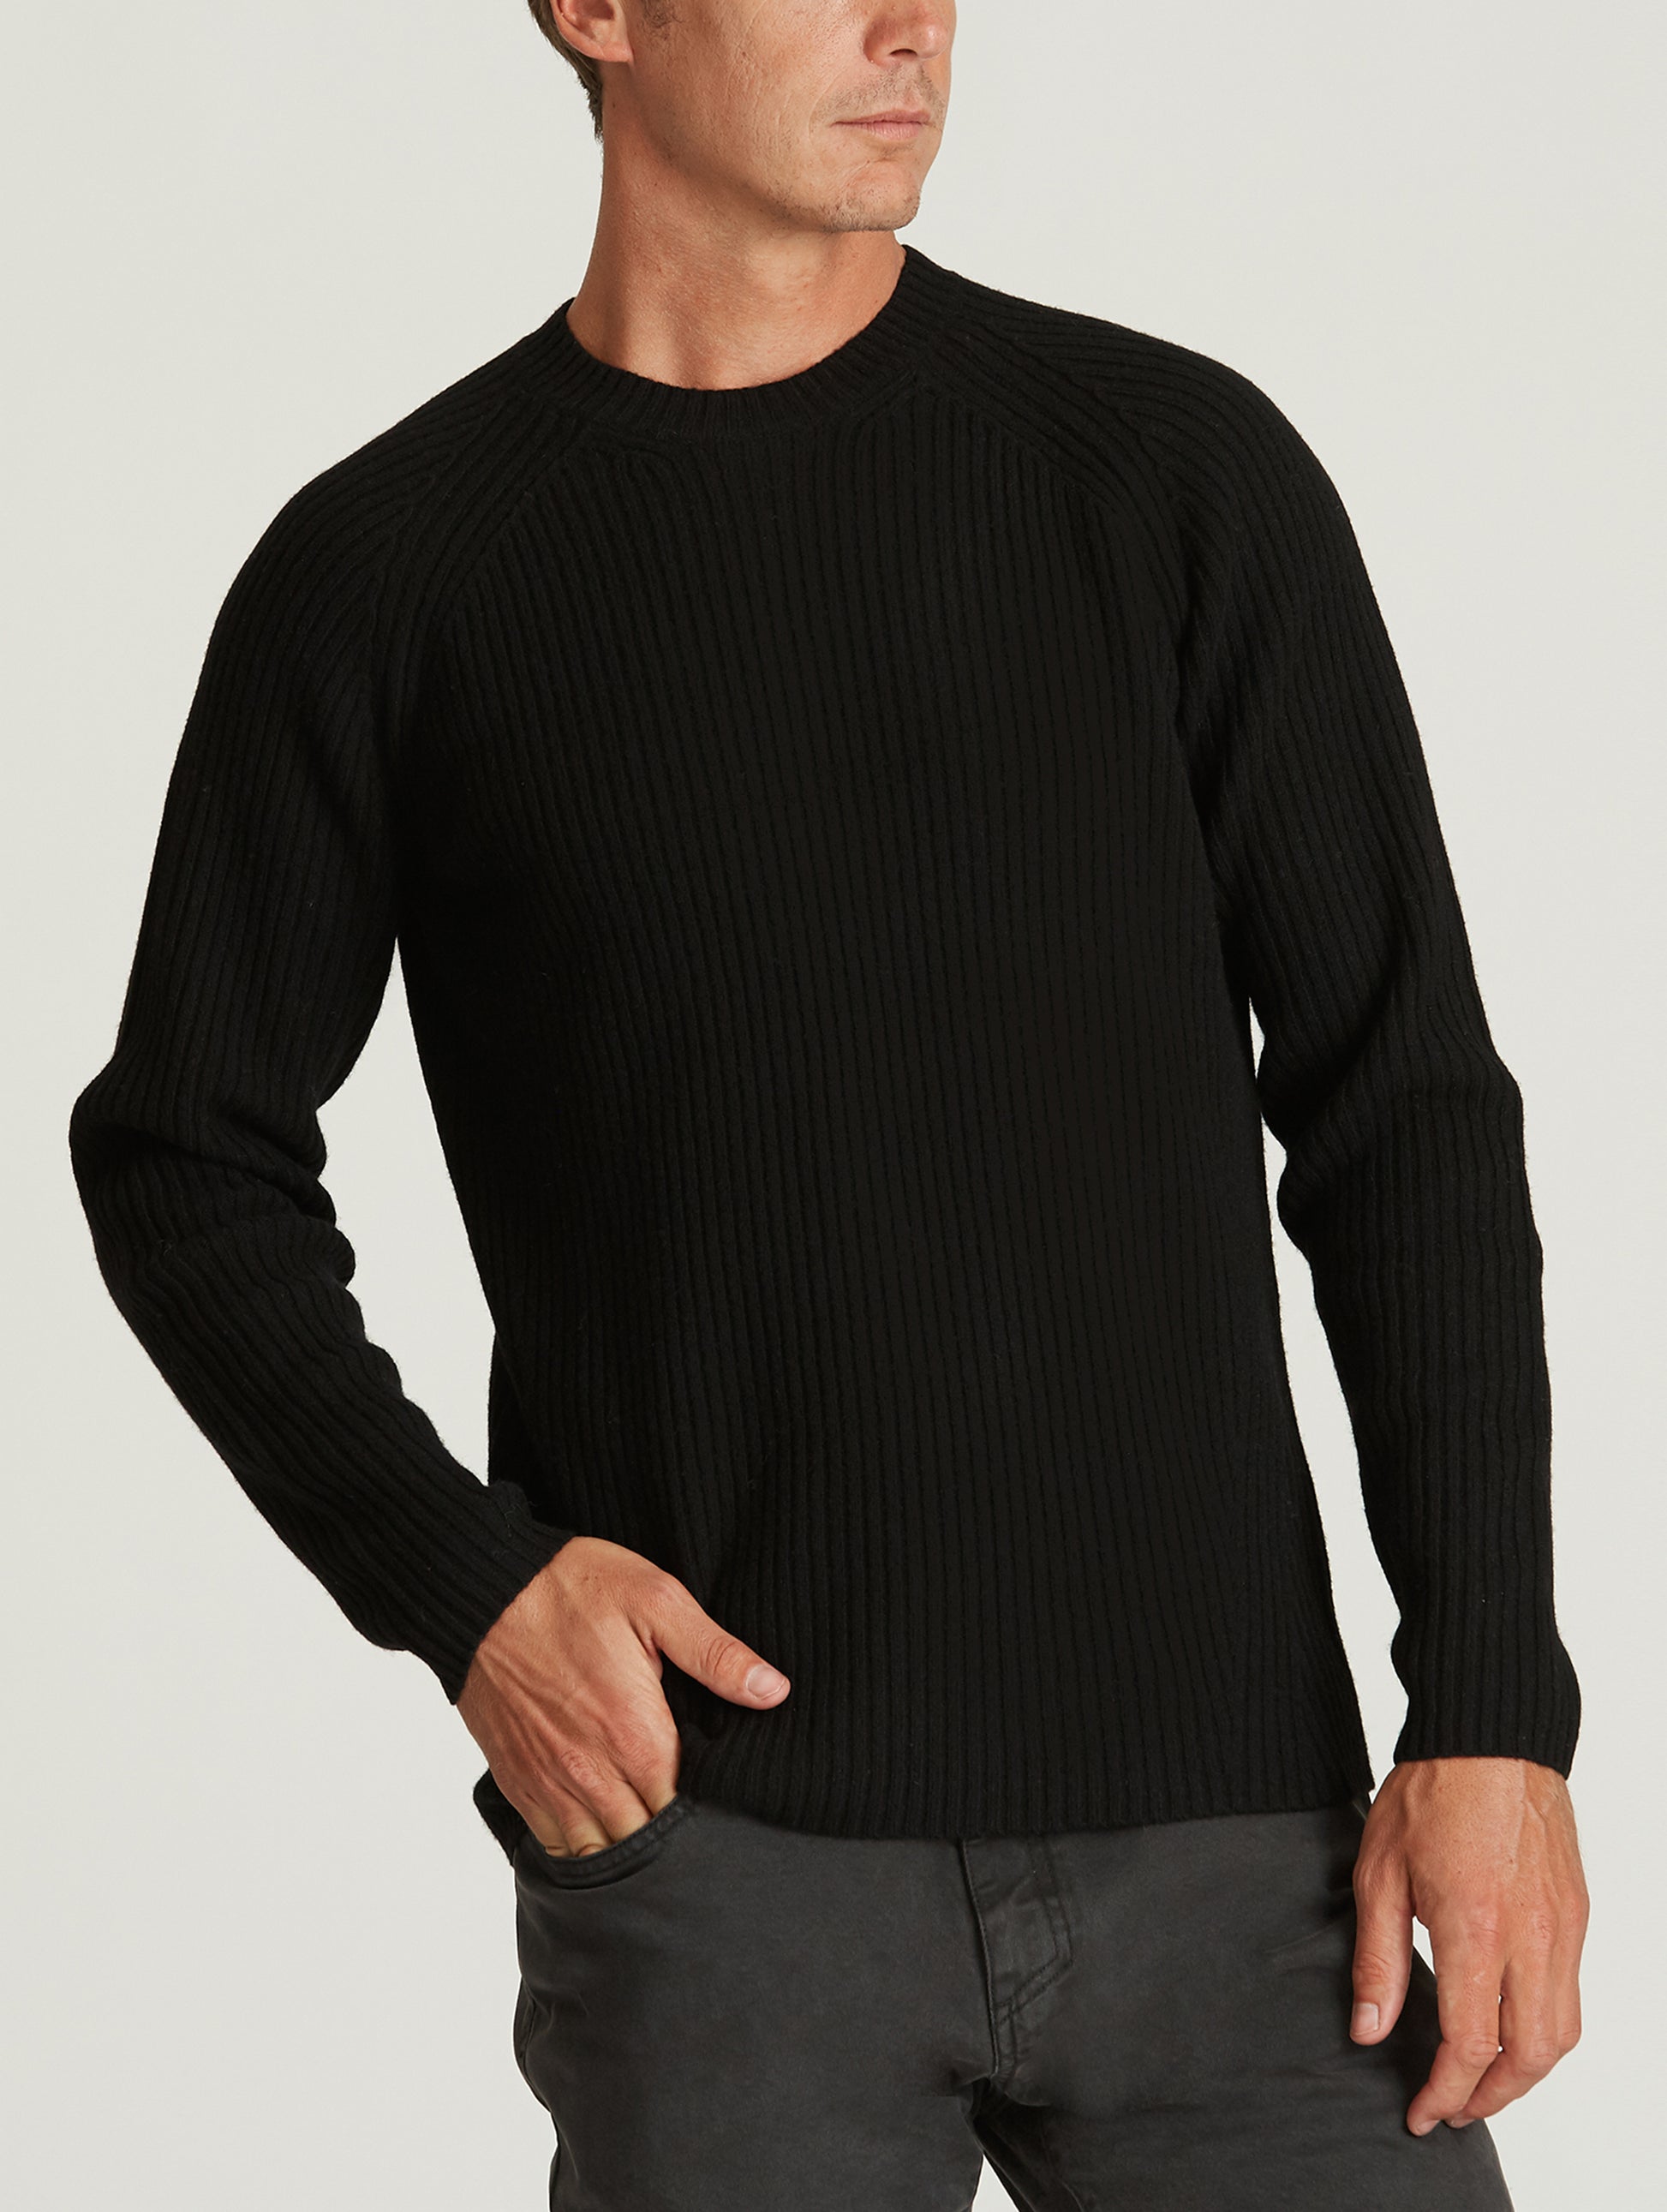 sweater for men at Aether Apparel